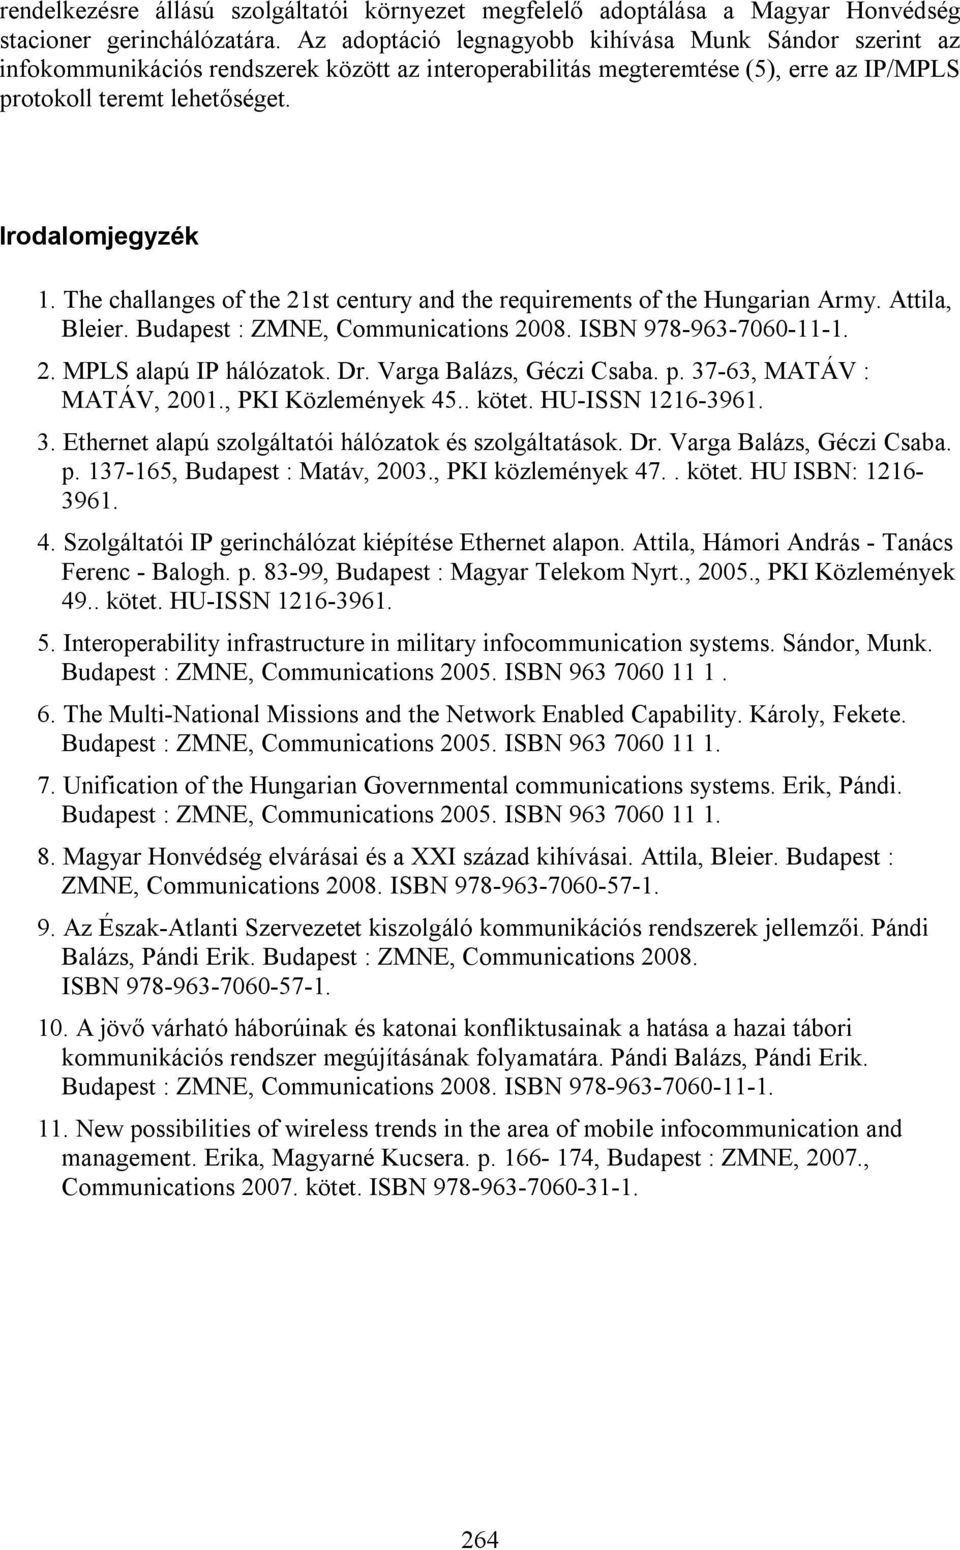 The challanges of the 21st century and the requirements of the Hungarian Army. Attila, Bleier. Budapest : ZMNE, Communications 2008. ISBN 978-963-7060-11-1. 2. MPLS alapú IP hálózatok. Dr.